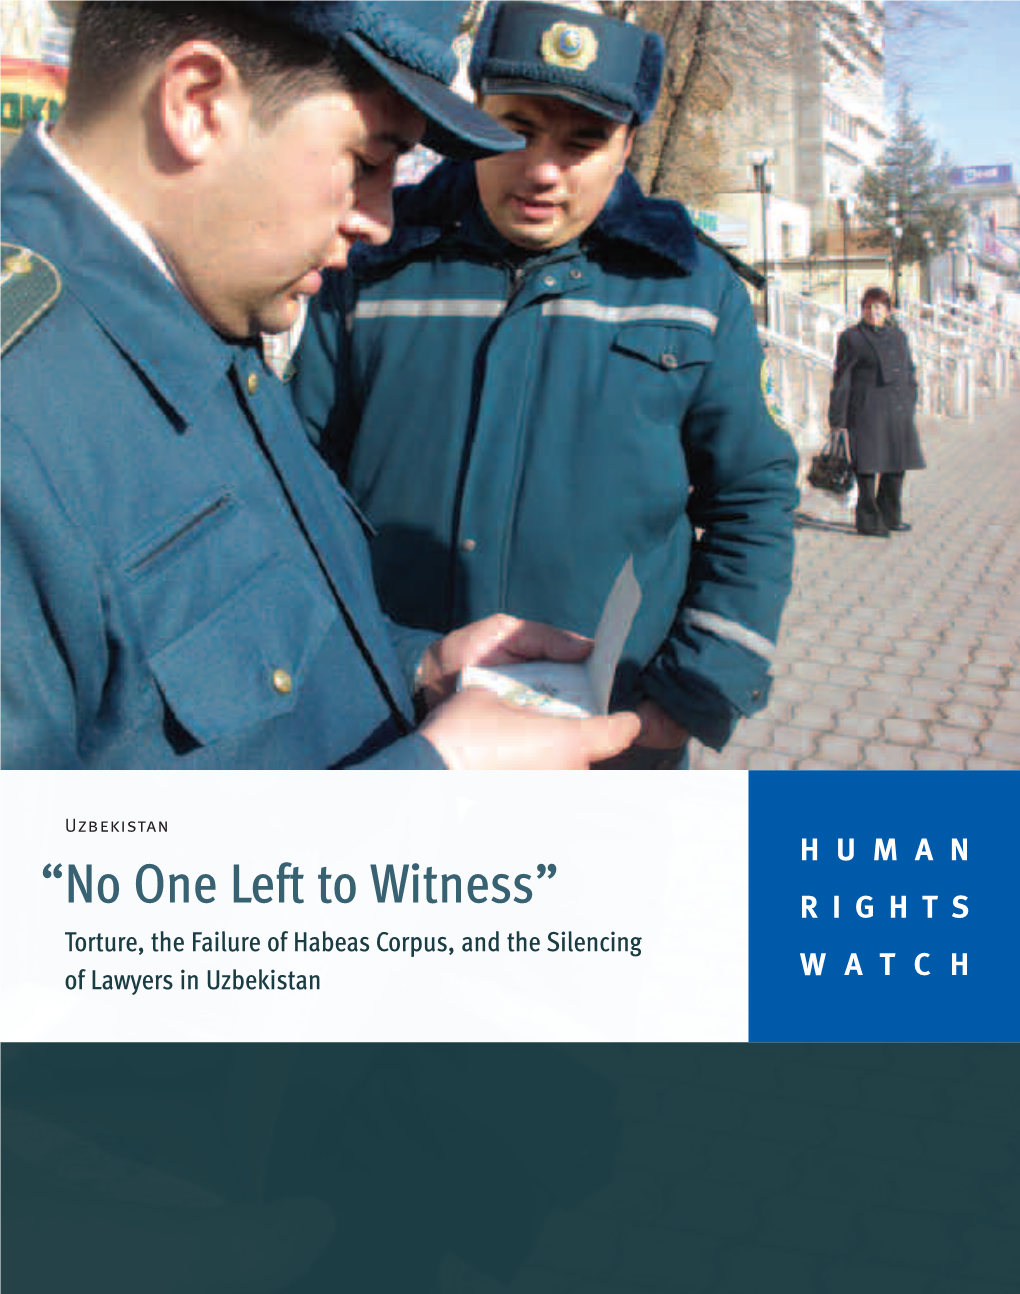 “No One Left to Witness” RIGHTS Torture, the Failure of Habeas Corpus, and the Silencing of Lawyers in Uzbekistan WATCH